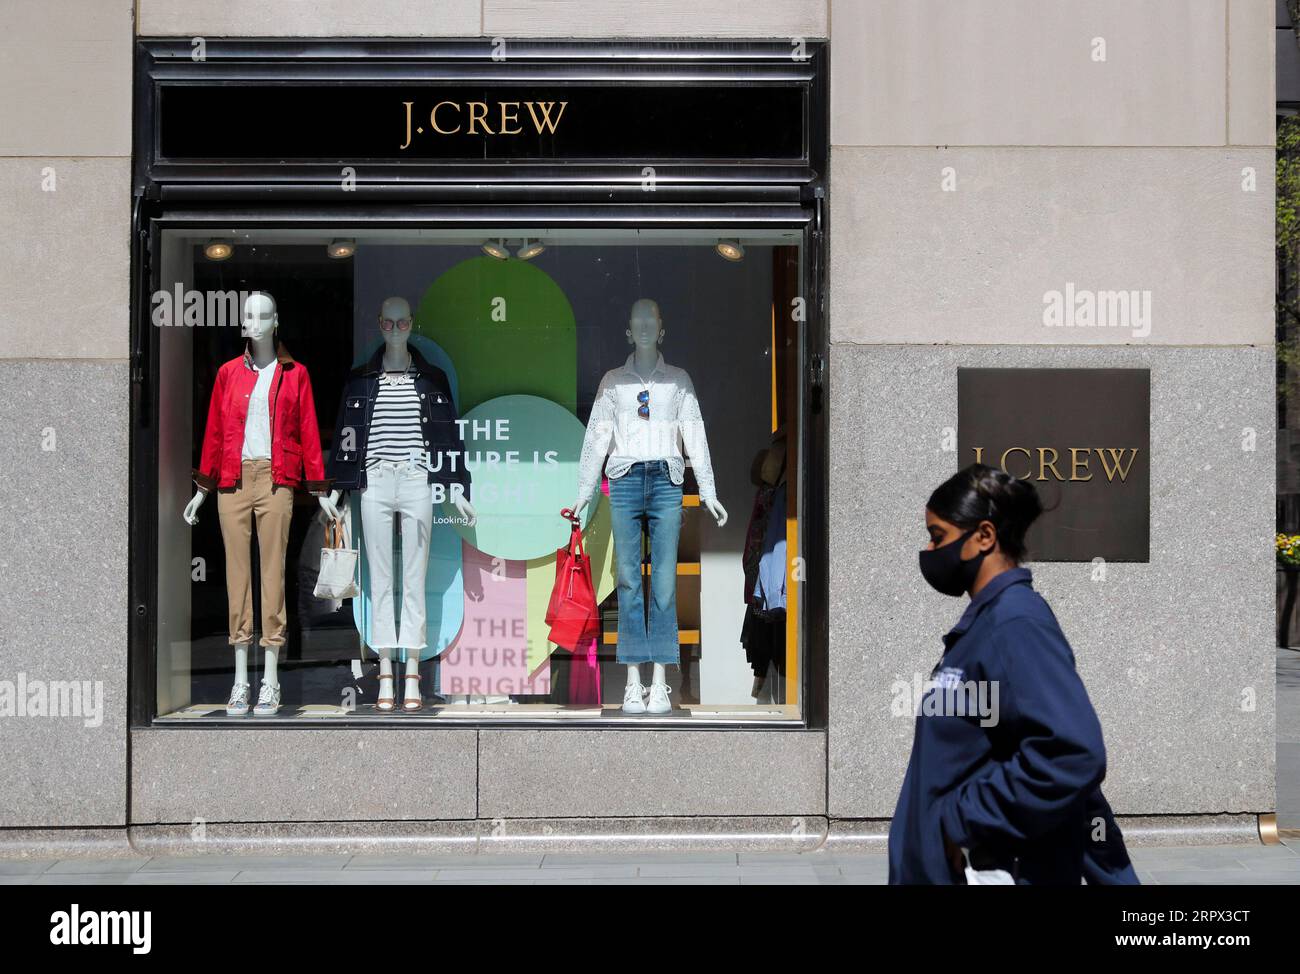 200505 -- NEW YORK, May 5, 2020 -- A pedestrian walks past a J.Crew store in Manhattan of New York, the United States, May 4, 2020. J. Crew Group, a U.S. apparel retailer which also operates the Madewell brand, has filed for bankruptcy protection, as the COVID-19 fallout continues to ripple through the nation. It has filed to begin Chapter 11 proceedings in the U.S. Bankruptcy Court for the Eastern District of Virginia, according to a statement by the company on Monday. The company said its lenders have agreed to convert approximately 1.65 billion U.S. dollars of its debt into equity.  U.S.-NE Stock Photo